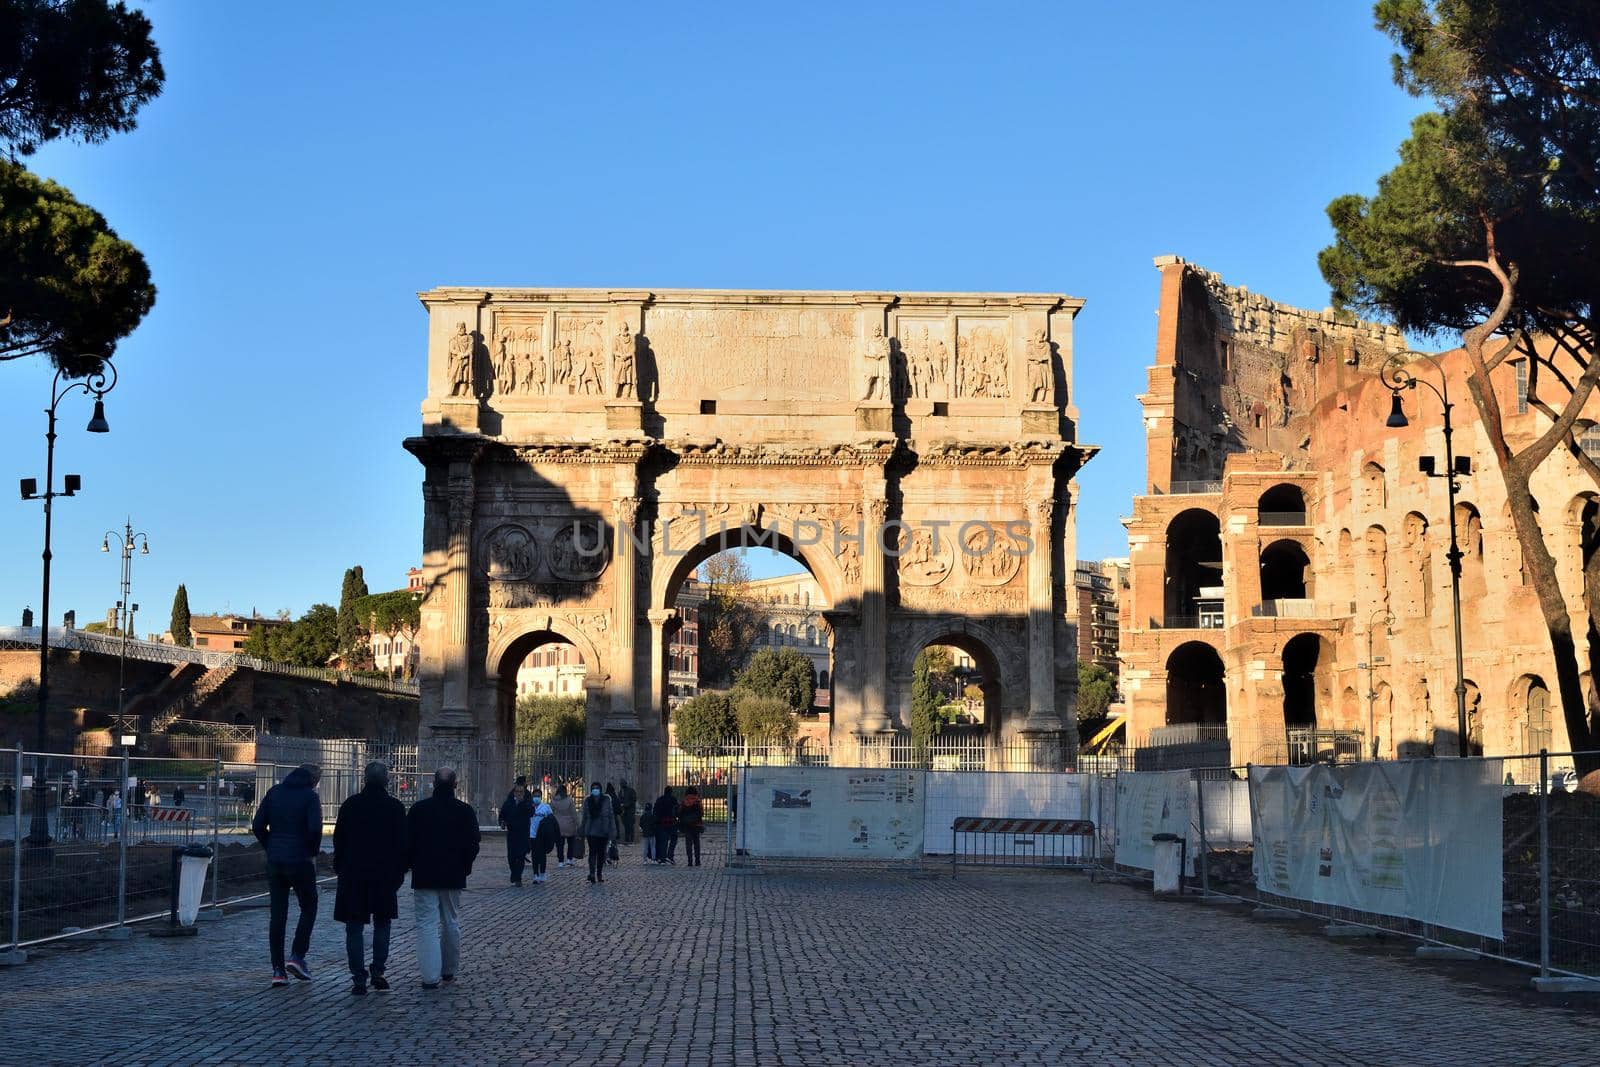 Rome, Italy - December 13th 2020: View of the Arch of Constantine and Coliseum with few tourists due to the Covid19 epidemic by silentstock639